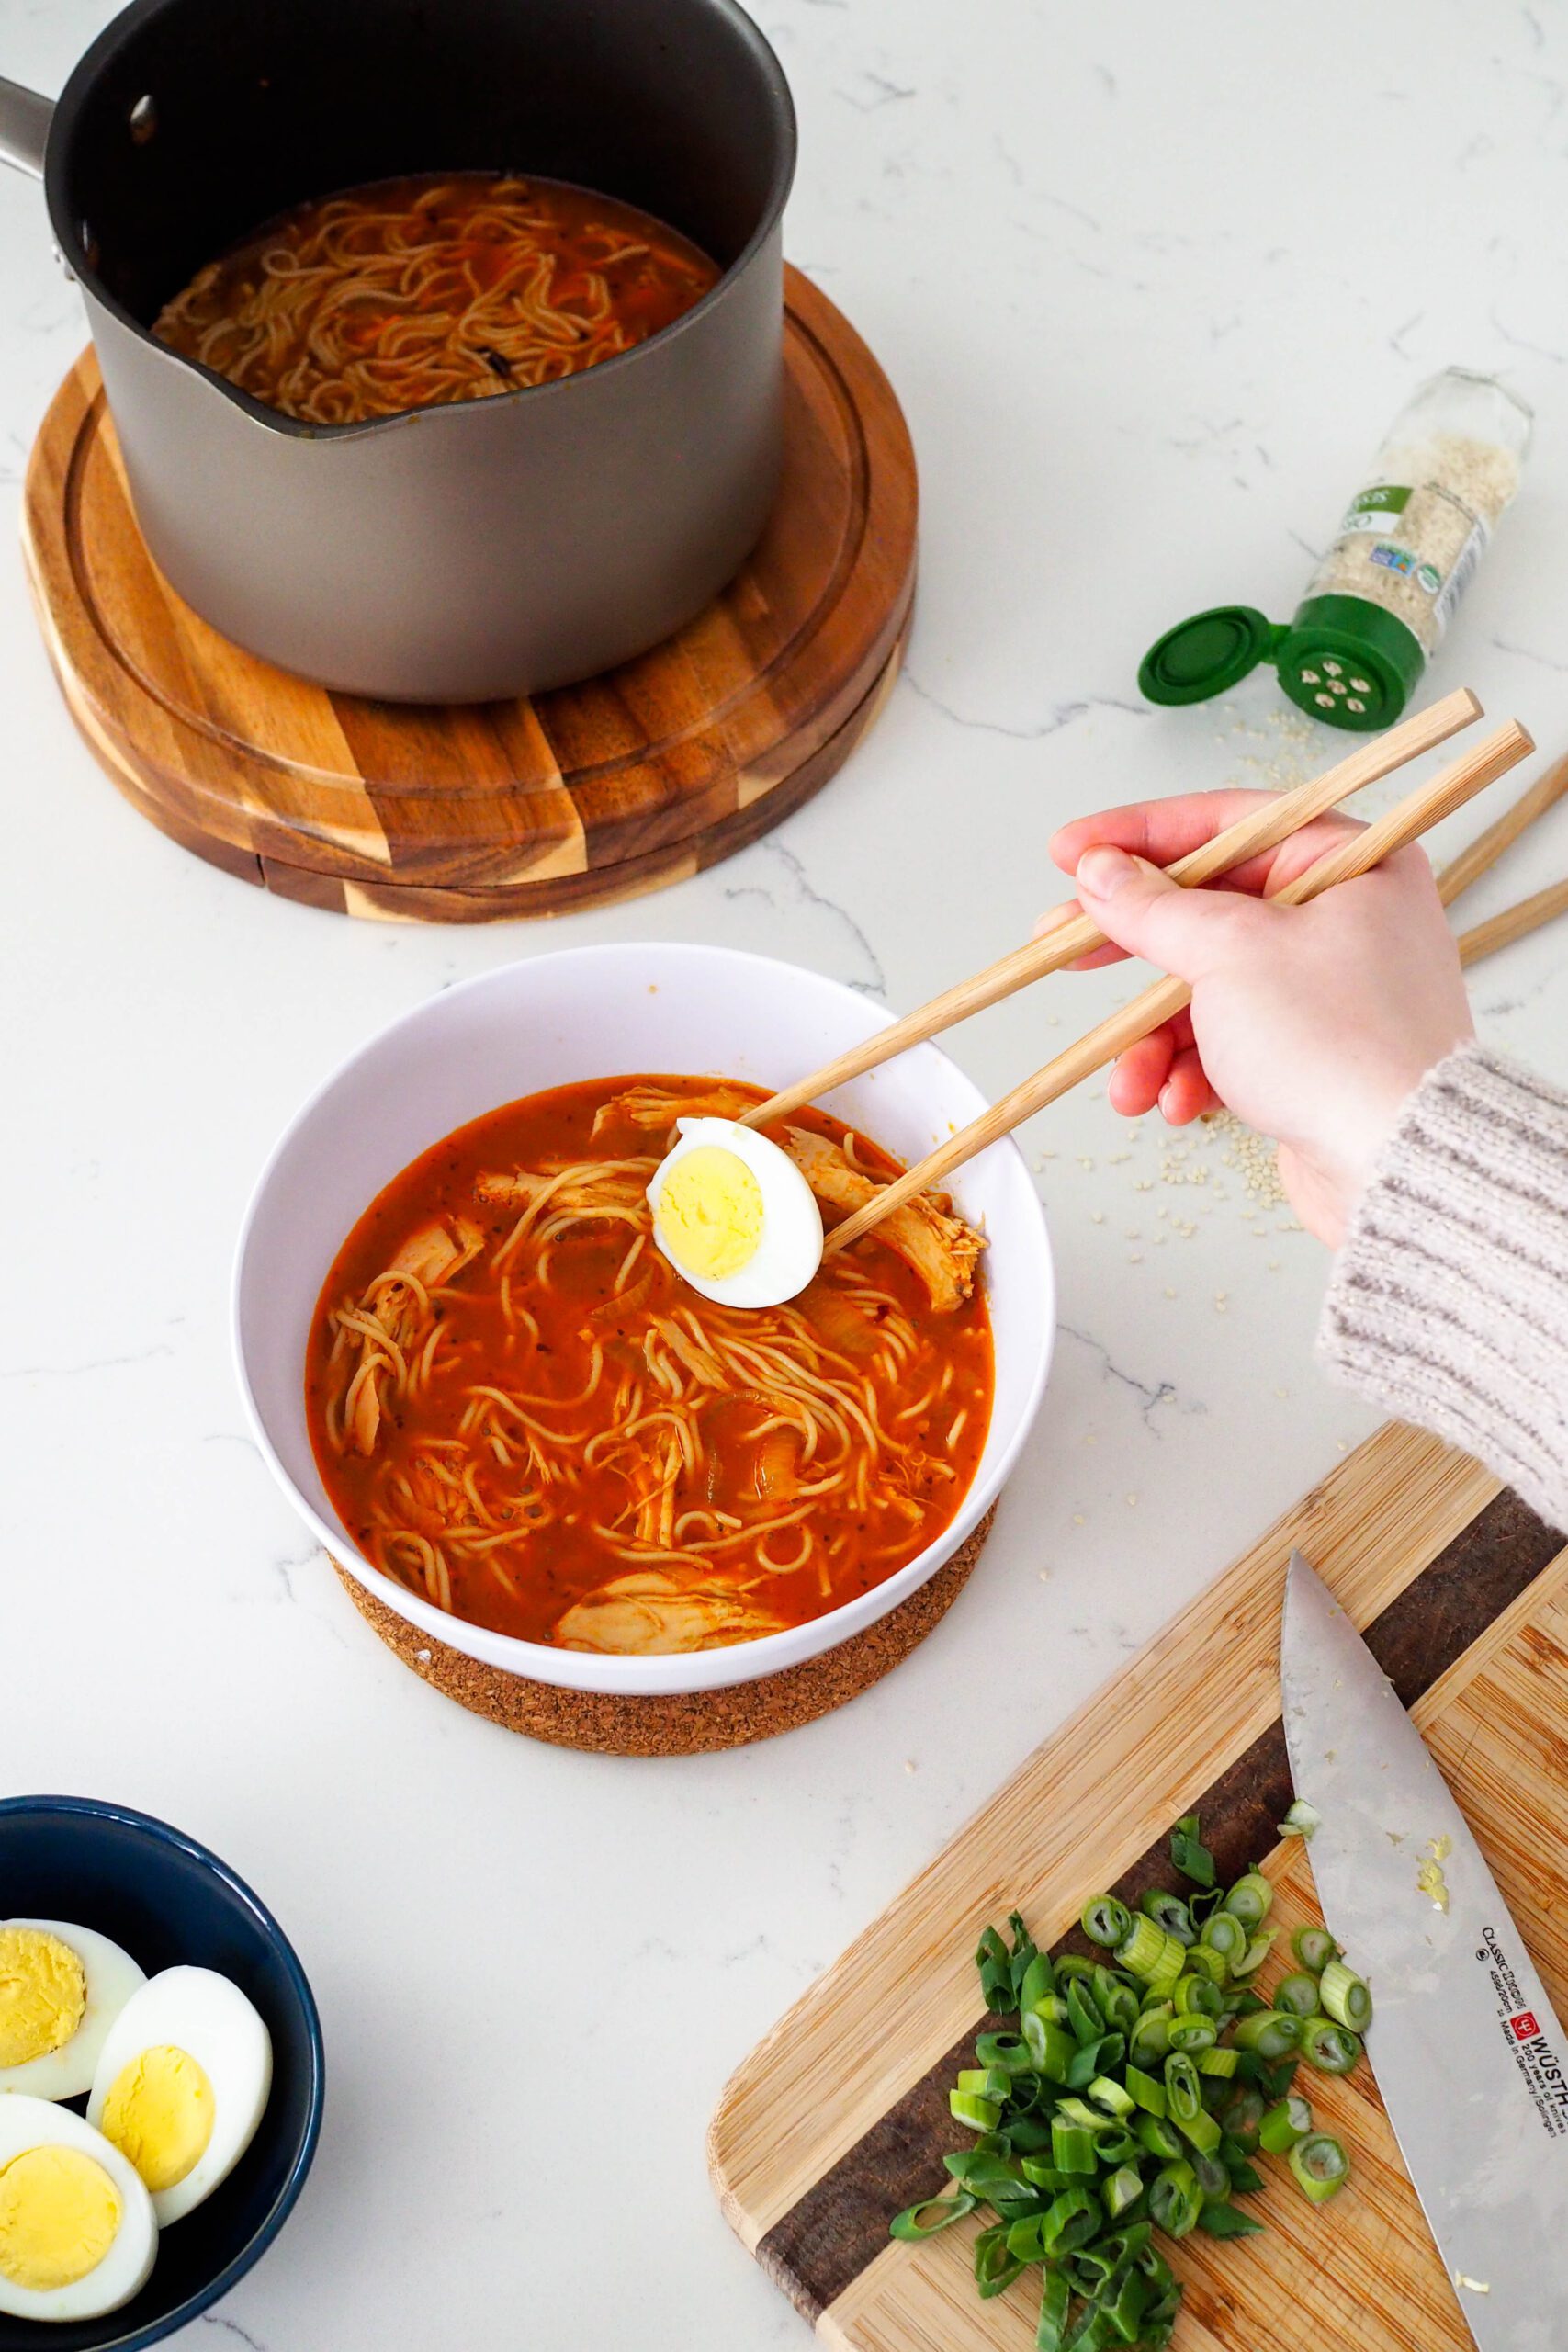 A hand places half of a boiled egg into a bowl of ramen with chopsticks.